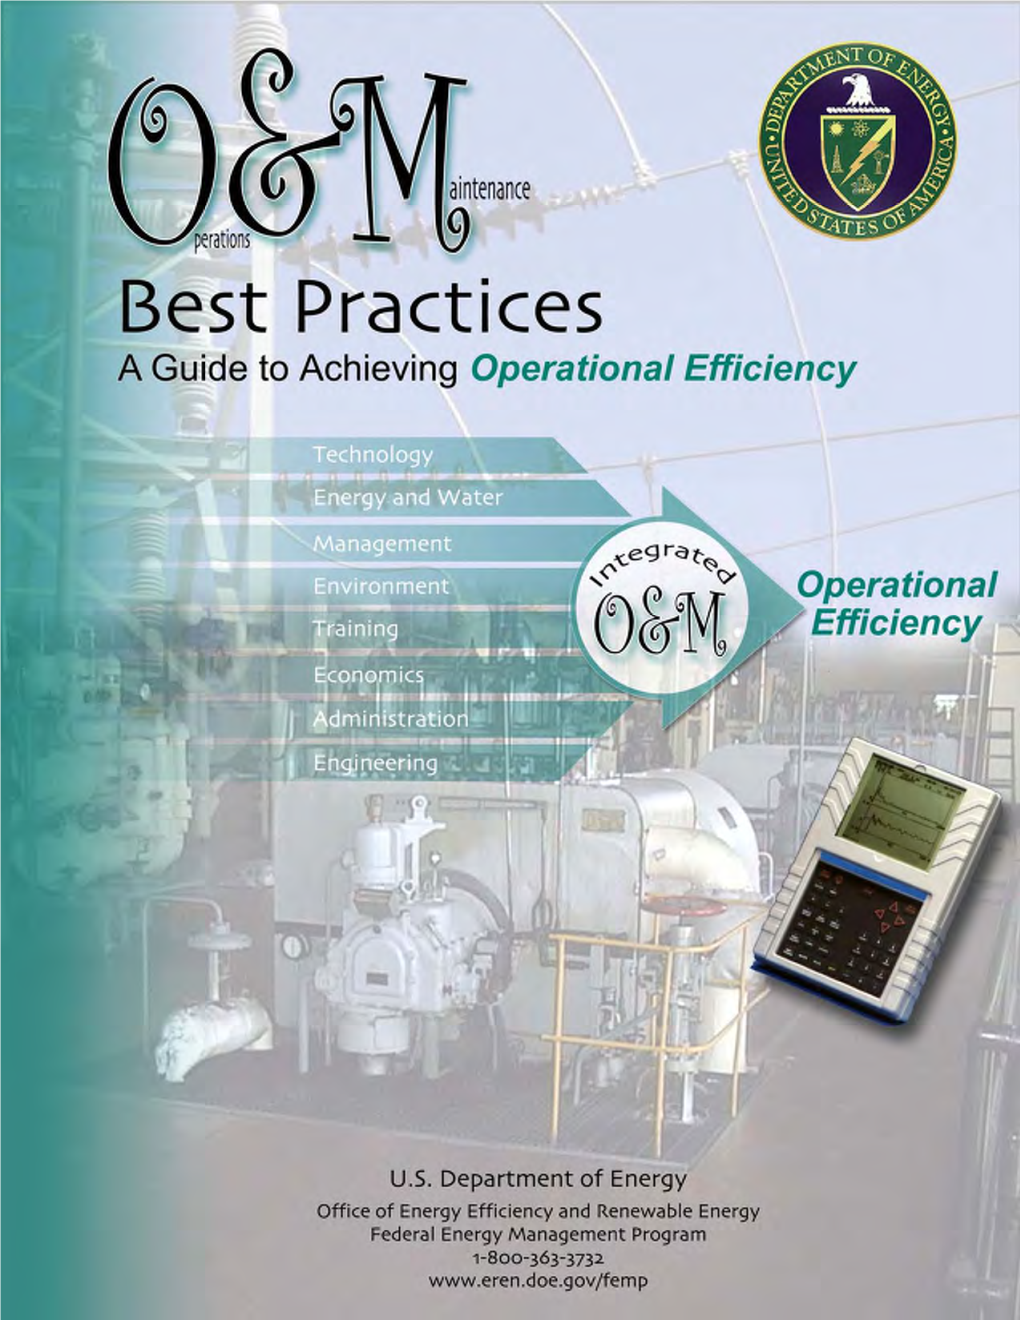 Operations & Maintenance Best Practices